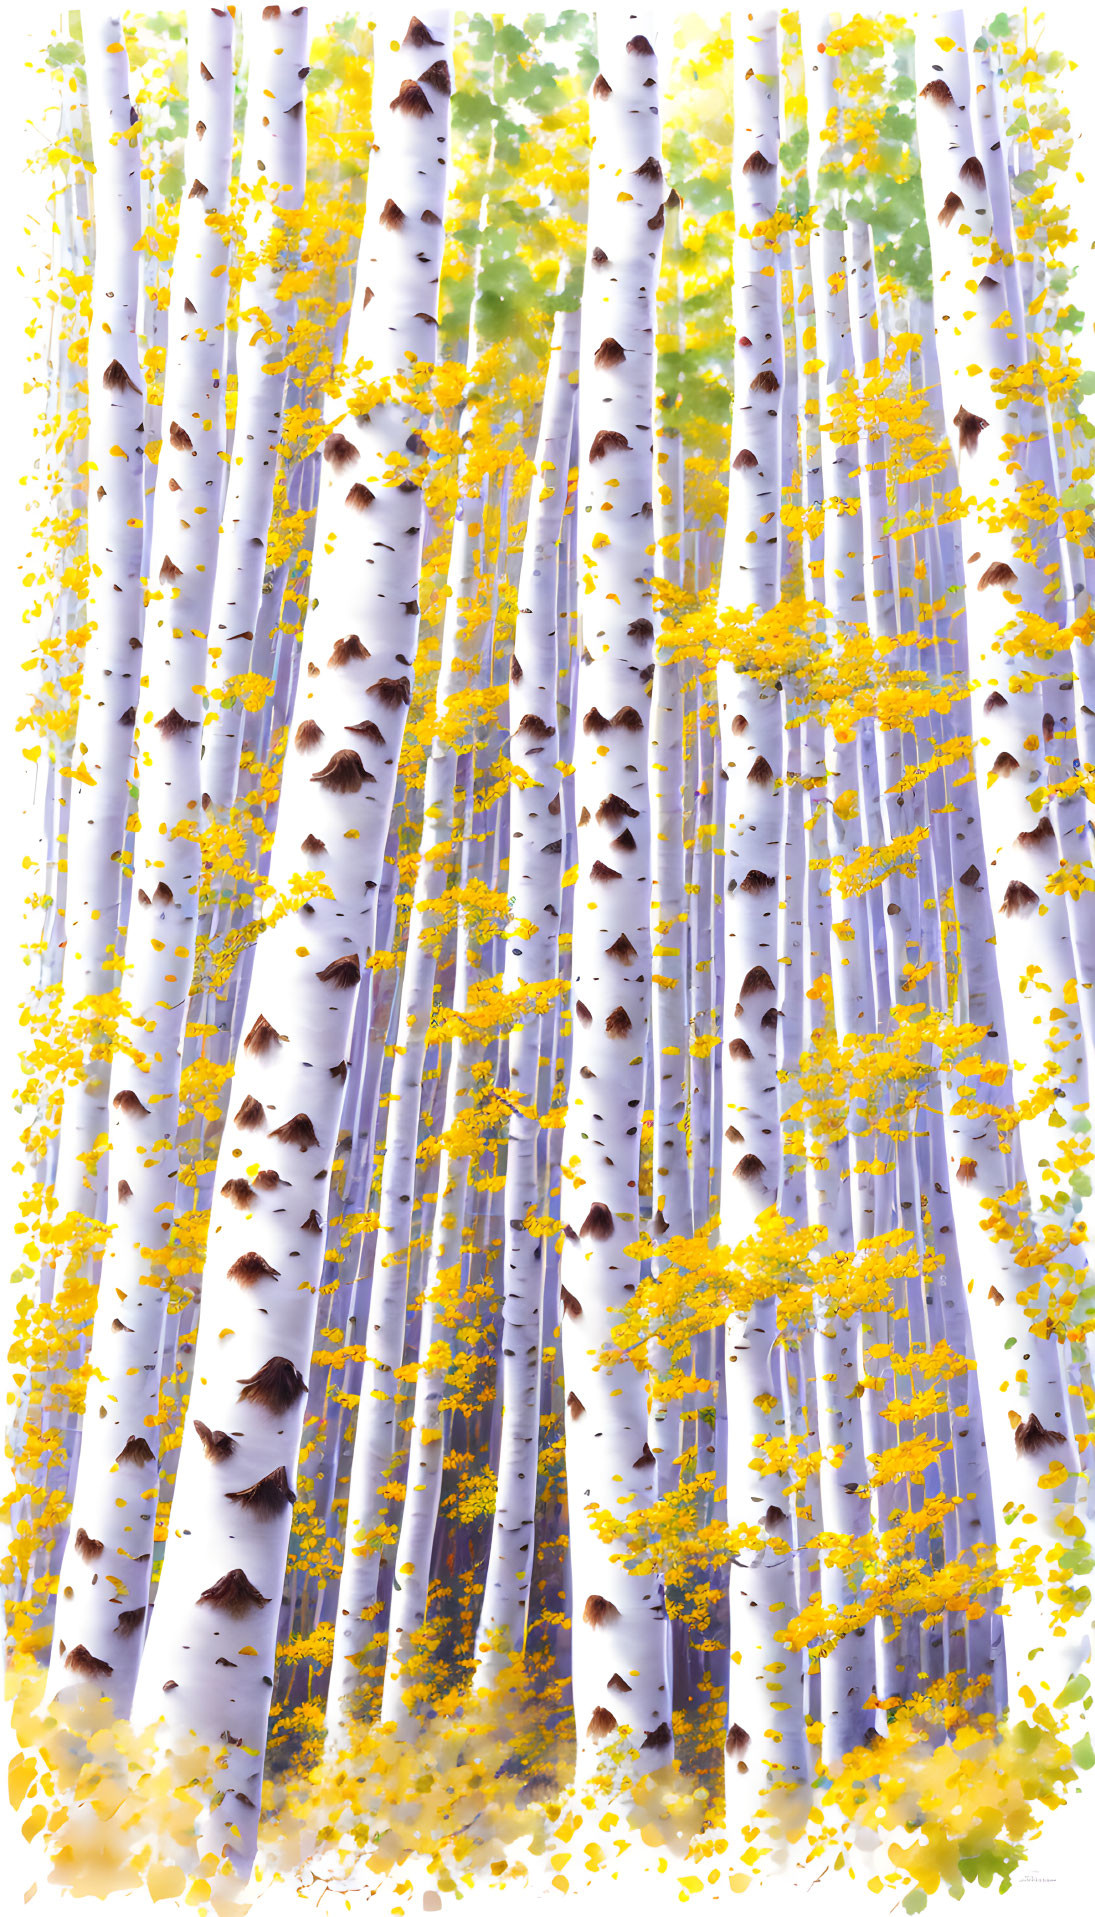 Autumn in the Birch Trees